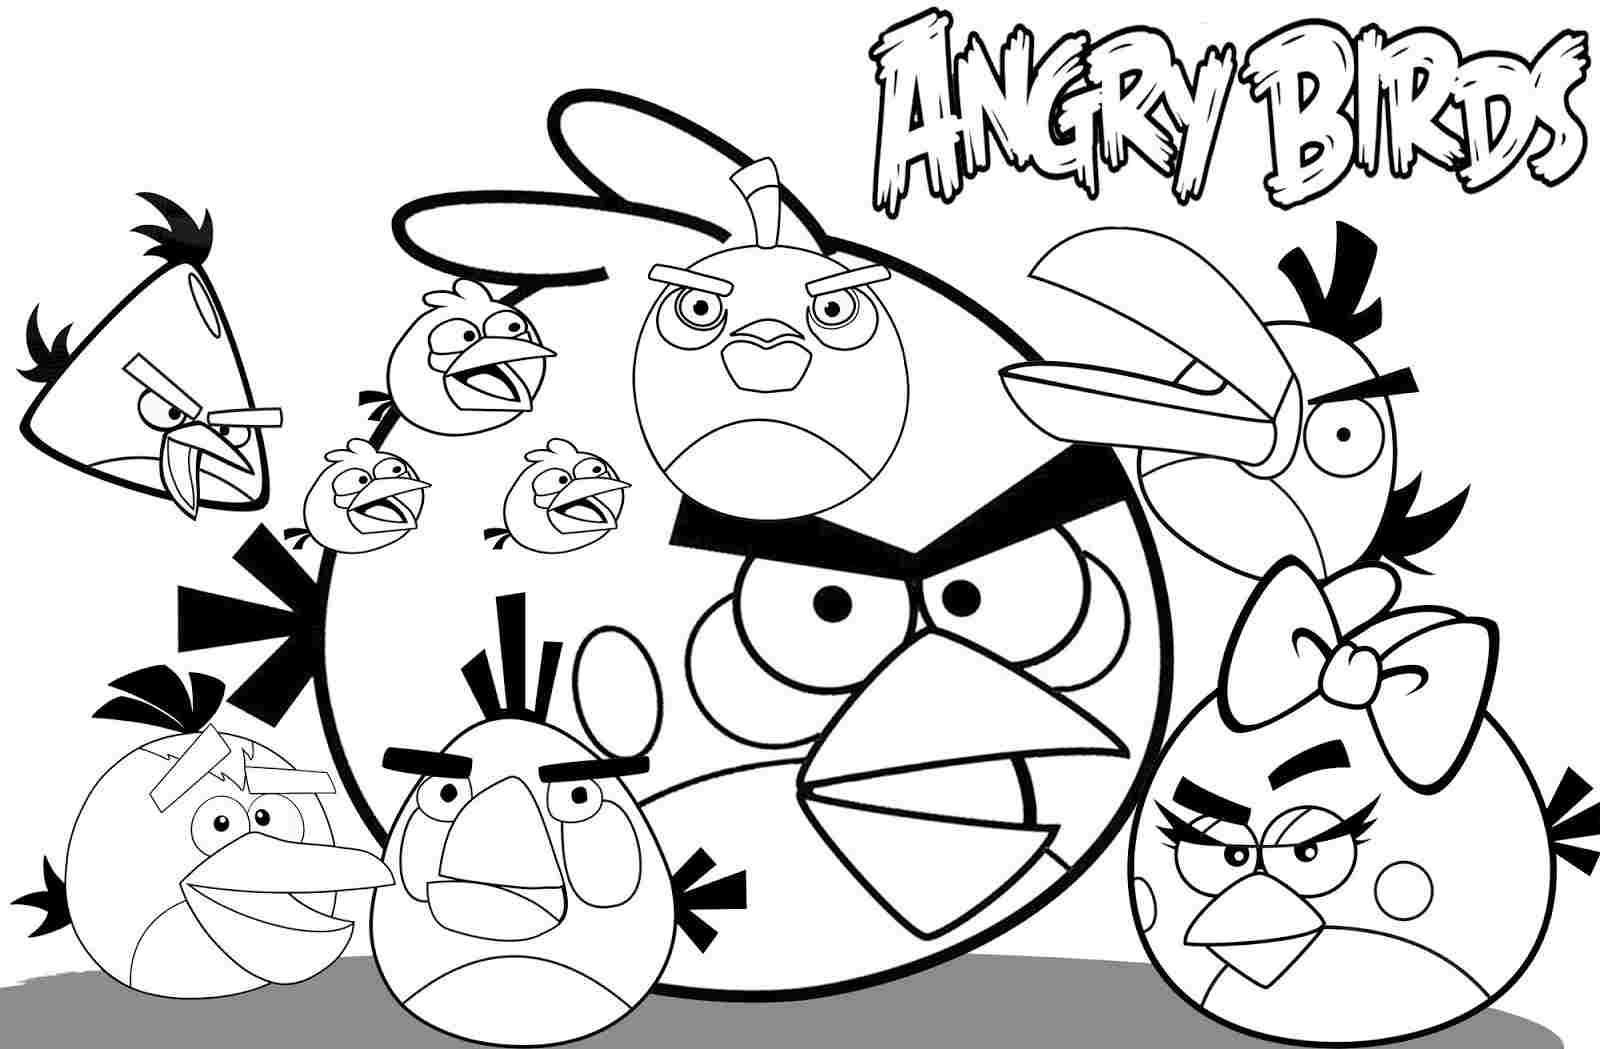 Angry Birds Coloring Pages Pdf at GetColorings.com | Free printable